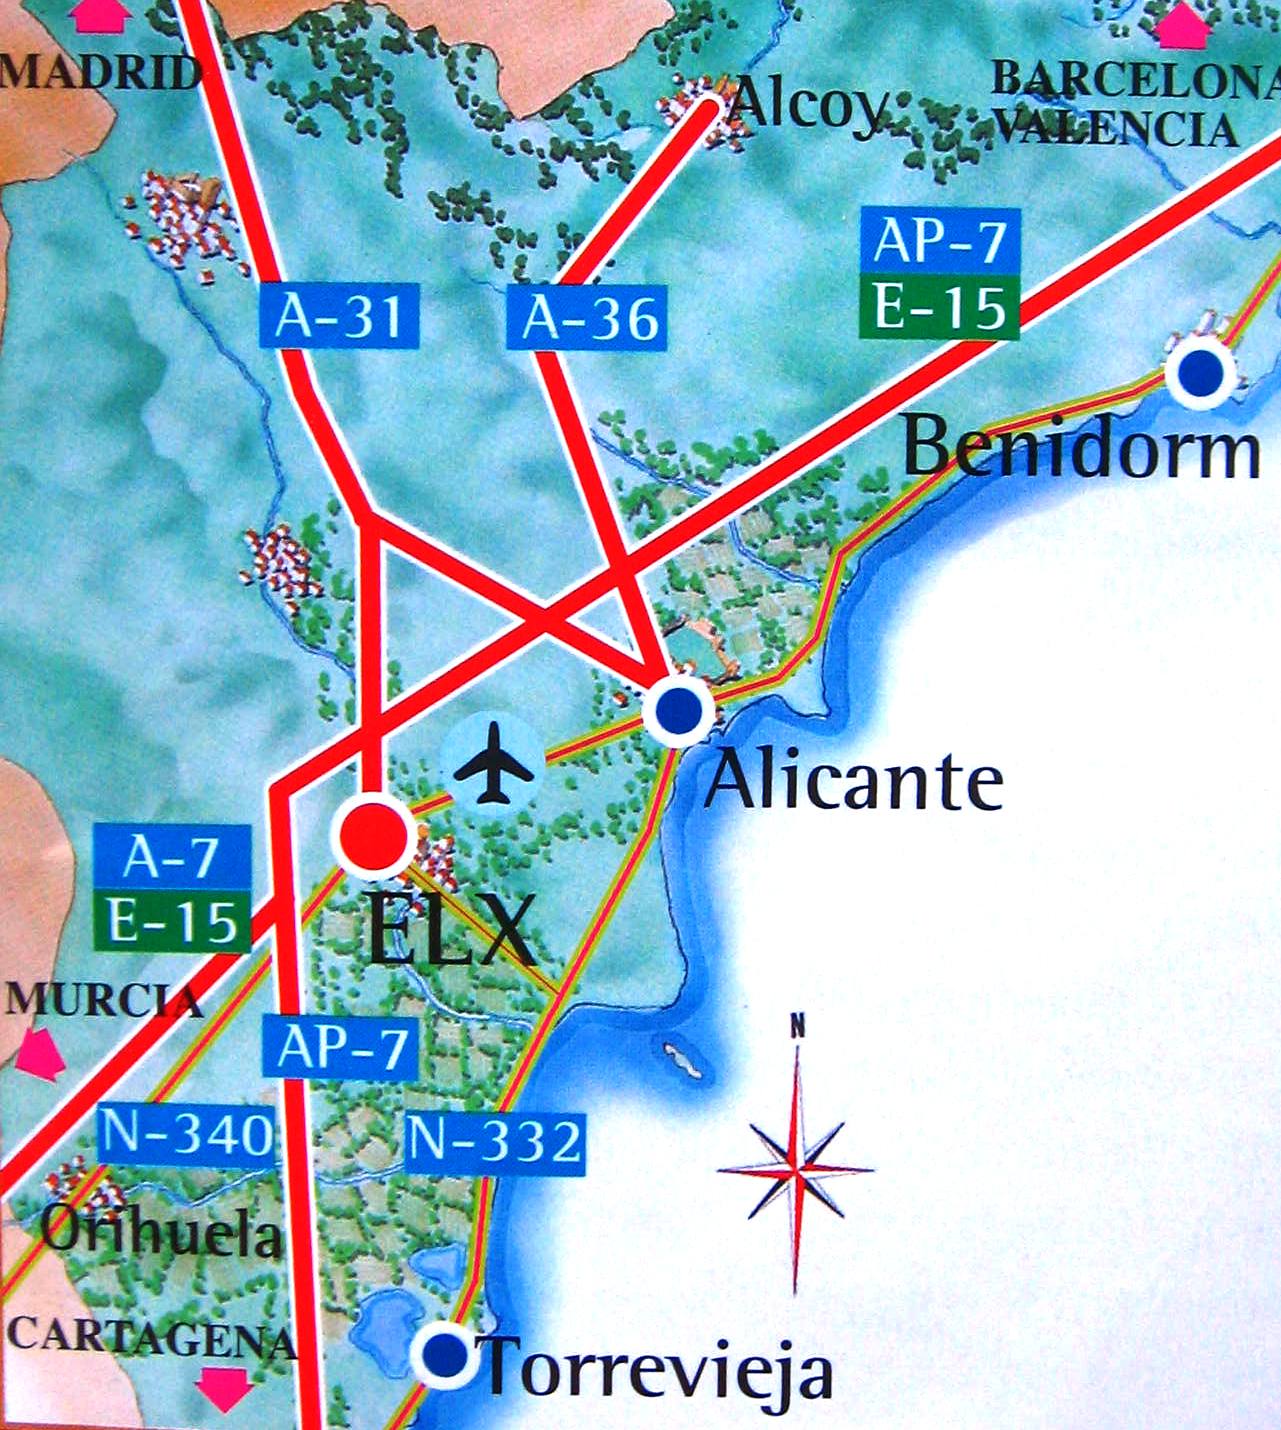 Alicante Airport is about 50 km far from Benidorm and about an Hour's drive to Benidorm - Spain 